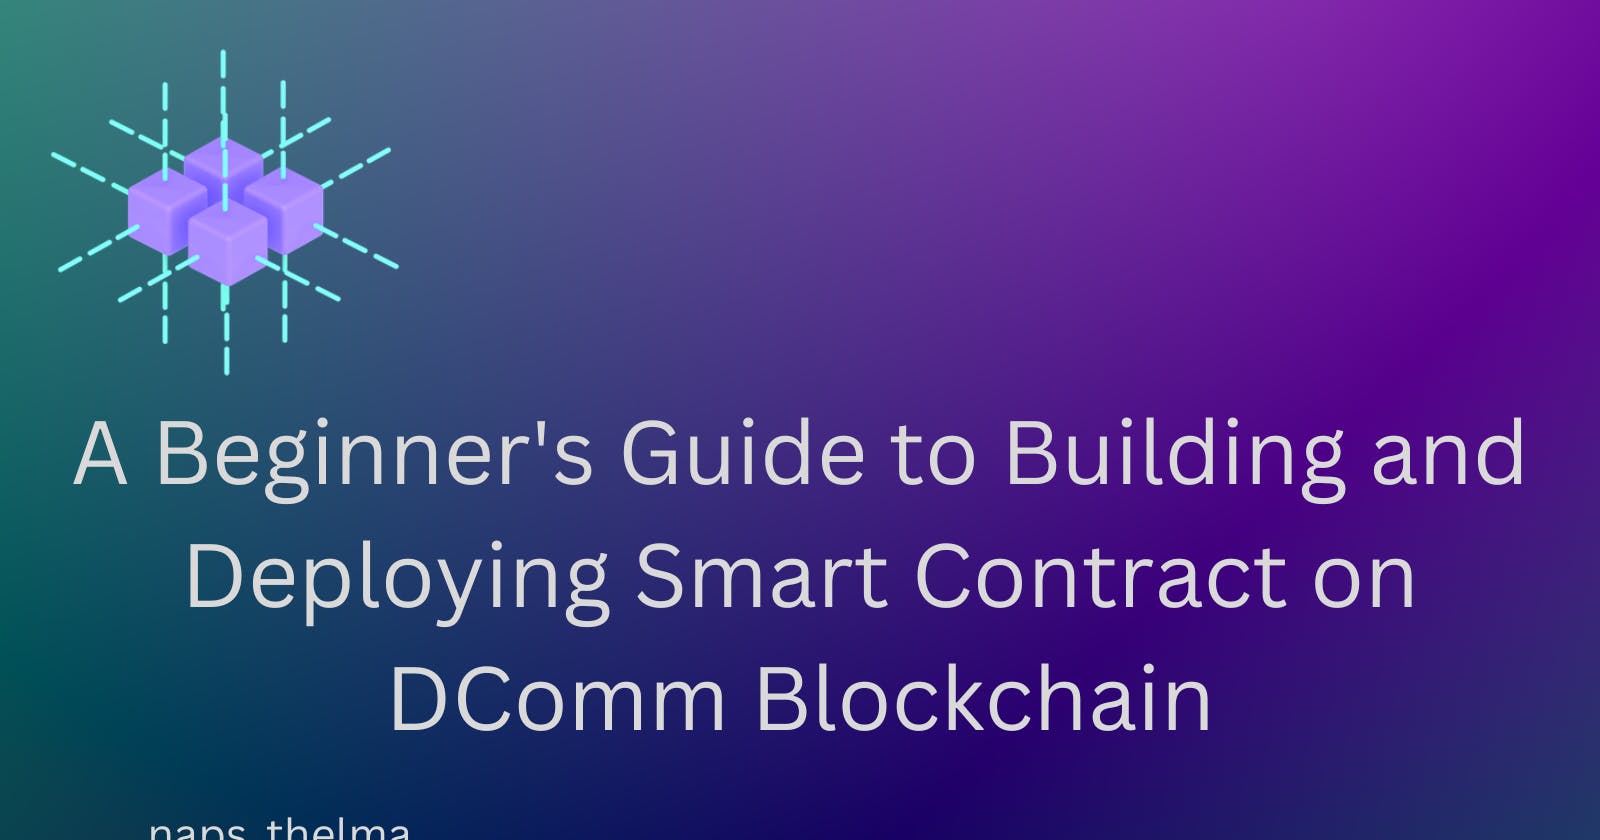 A Beginner's Guide to Building and Deploying Smart Contract on DComm Blockchain